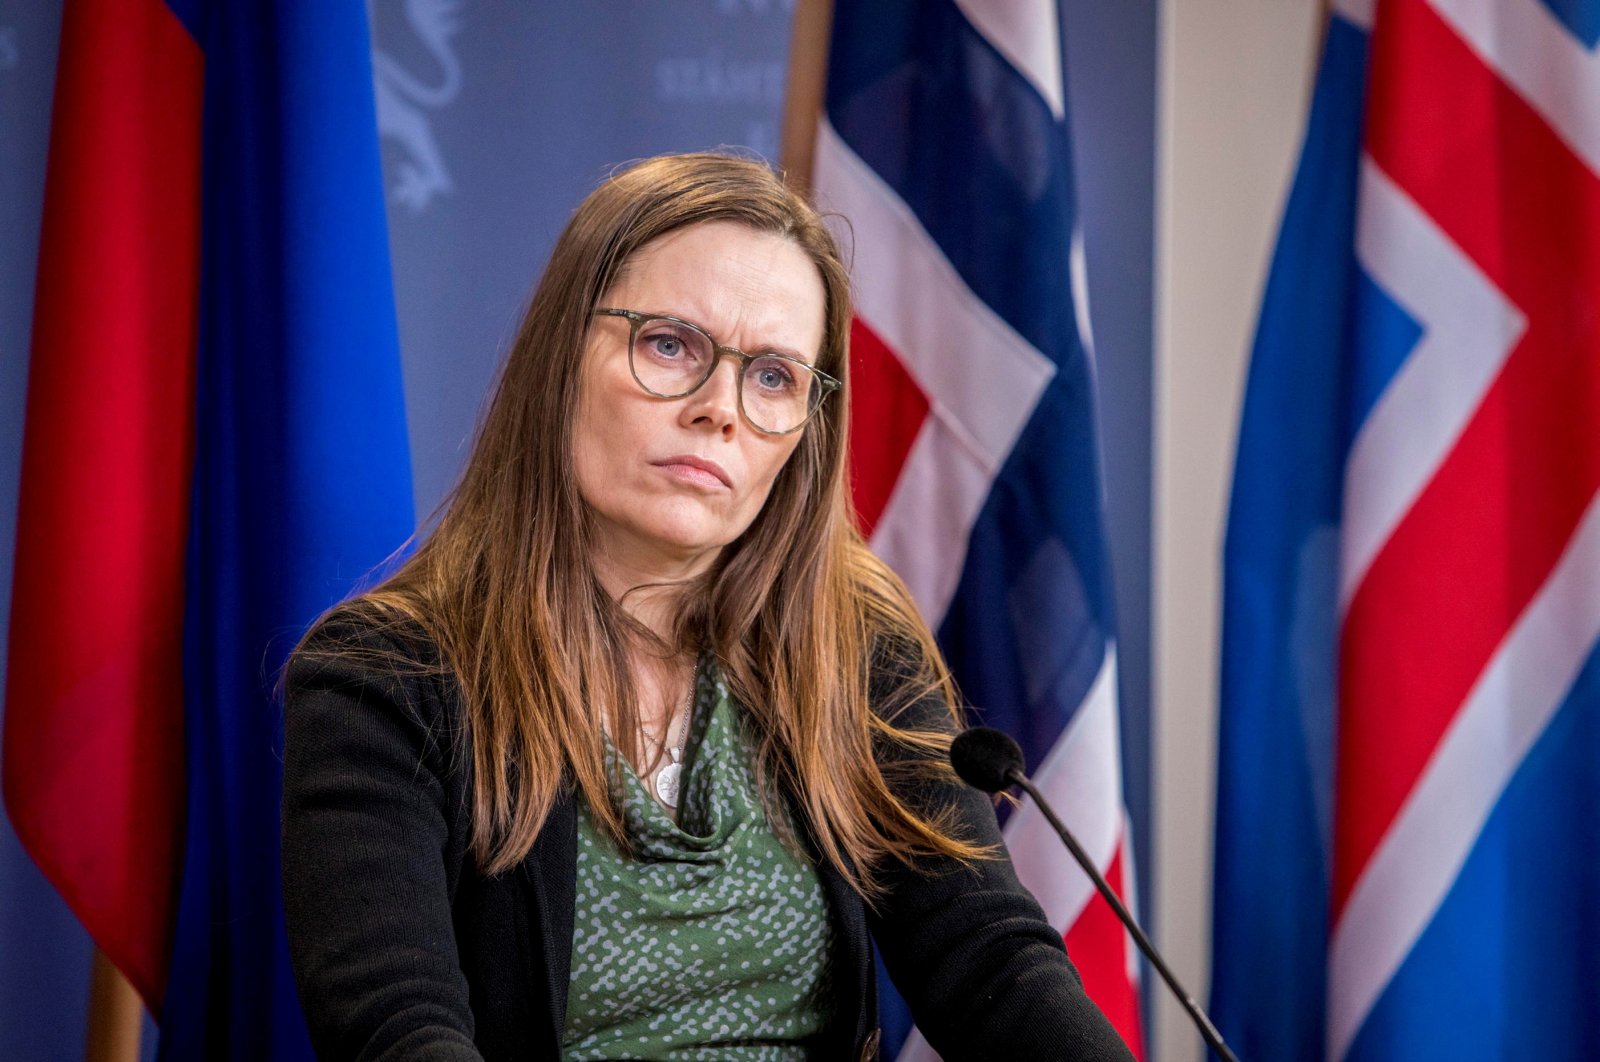 Iceland's Prime Minister Katrin Jakobsdottir attends a press conference in Oslo, Norway, Feb. 3, 2020. (Reuters Photo)